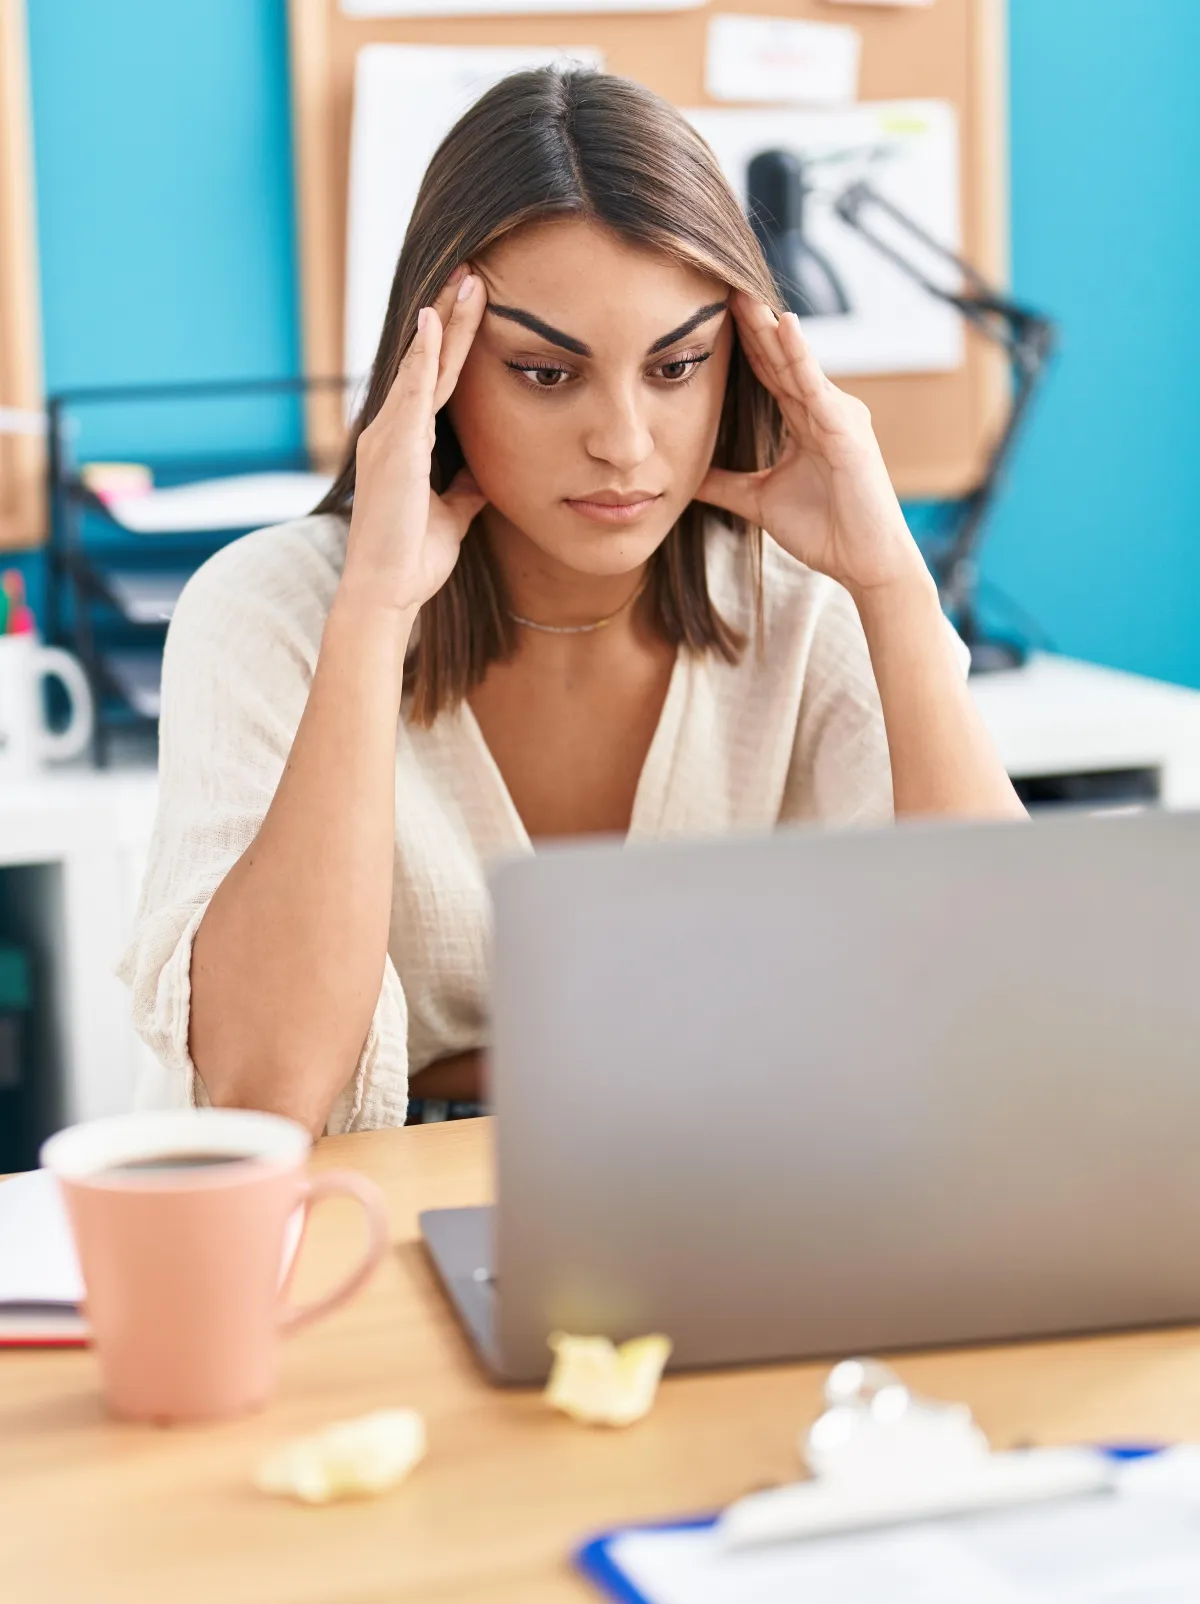 Hispanic business women staring at her laptop, feeling stressed. Her hands are up at her temples. She is sitting at a desk in an office environment.